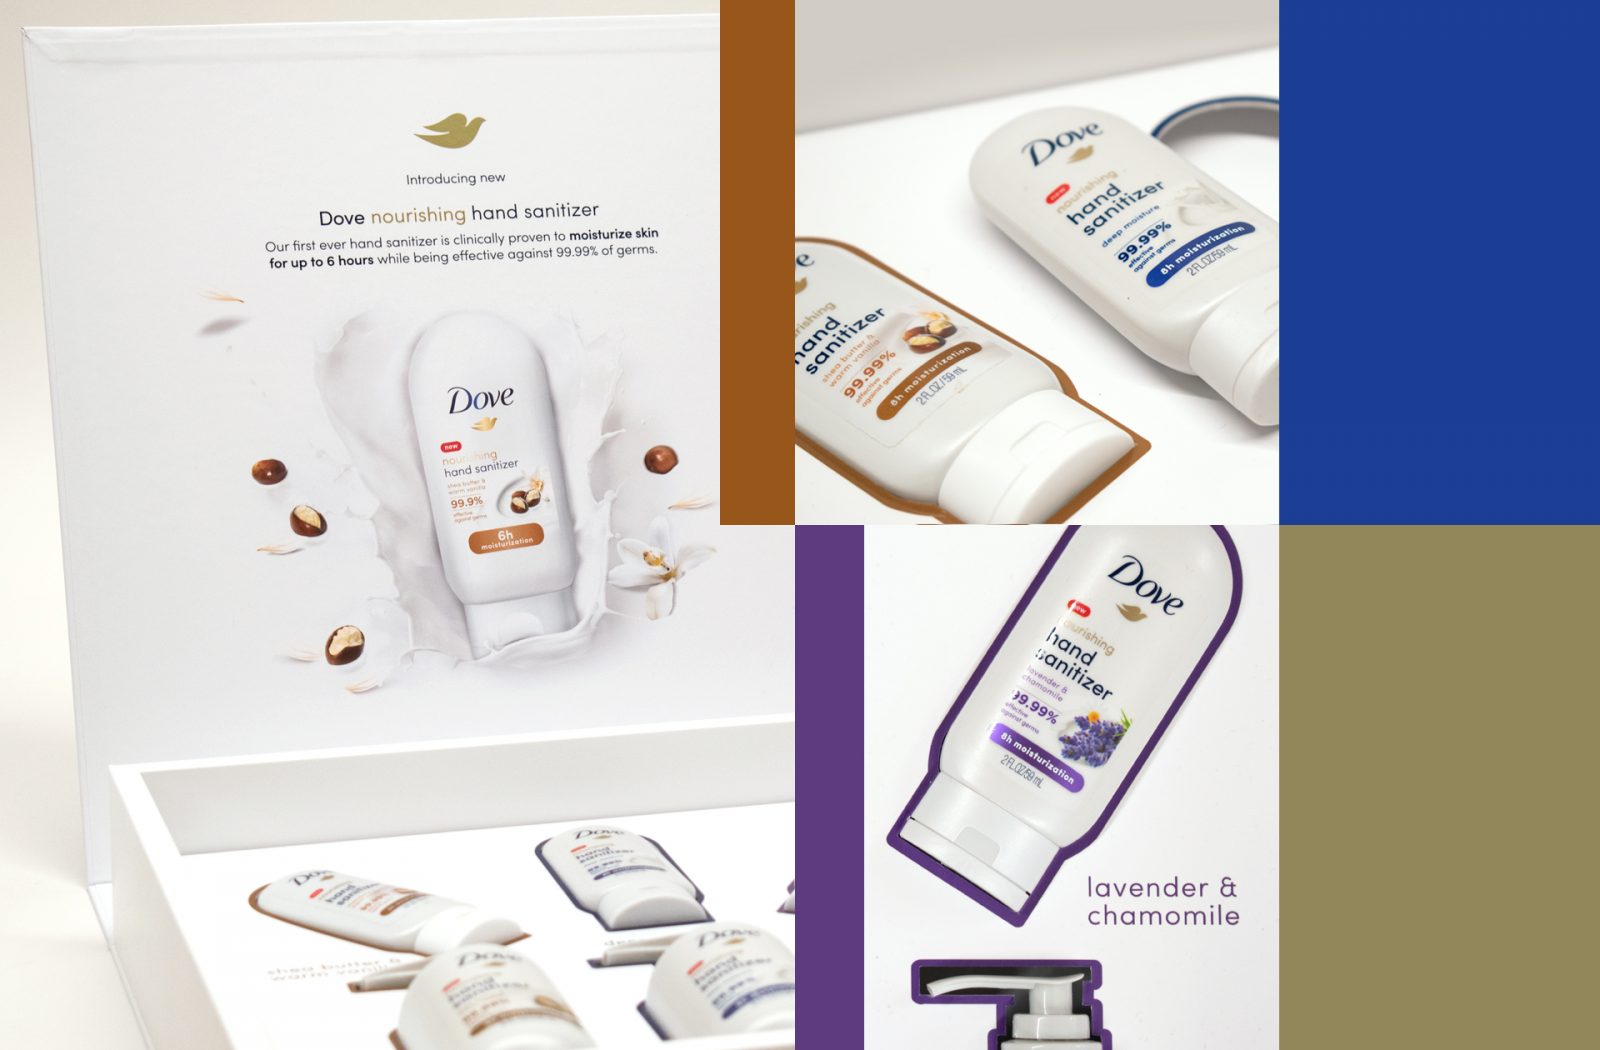 Collage of phtographs of an unboxing experience sales kit promoting skin moisturizing Dove hand sanitizer.